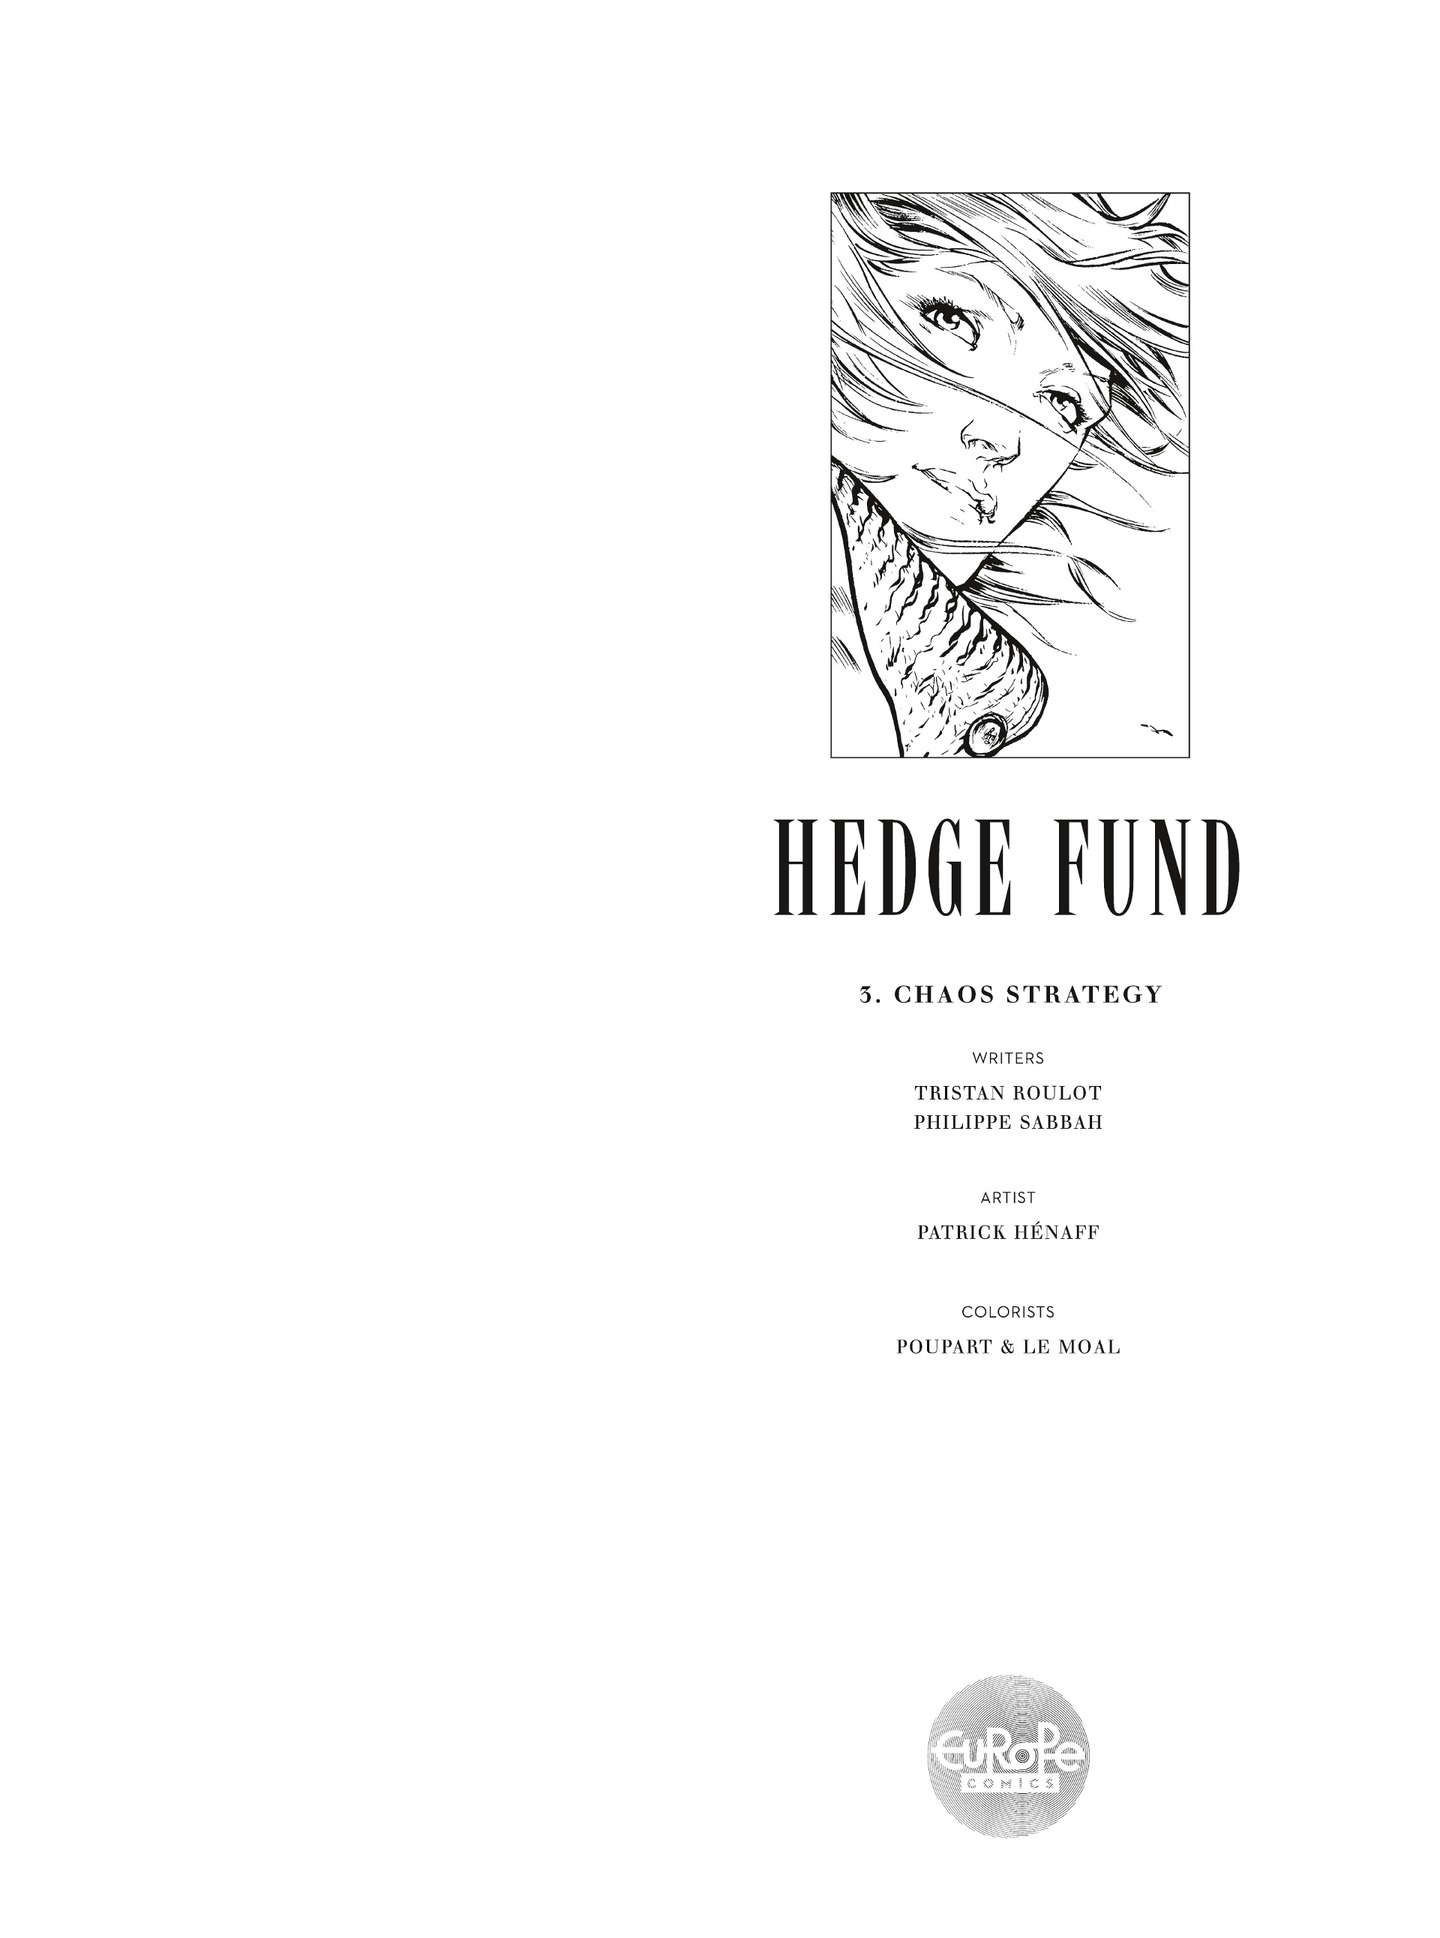 Read online Hedge Fund comic -  Issue #3 - 3